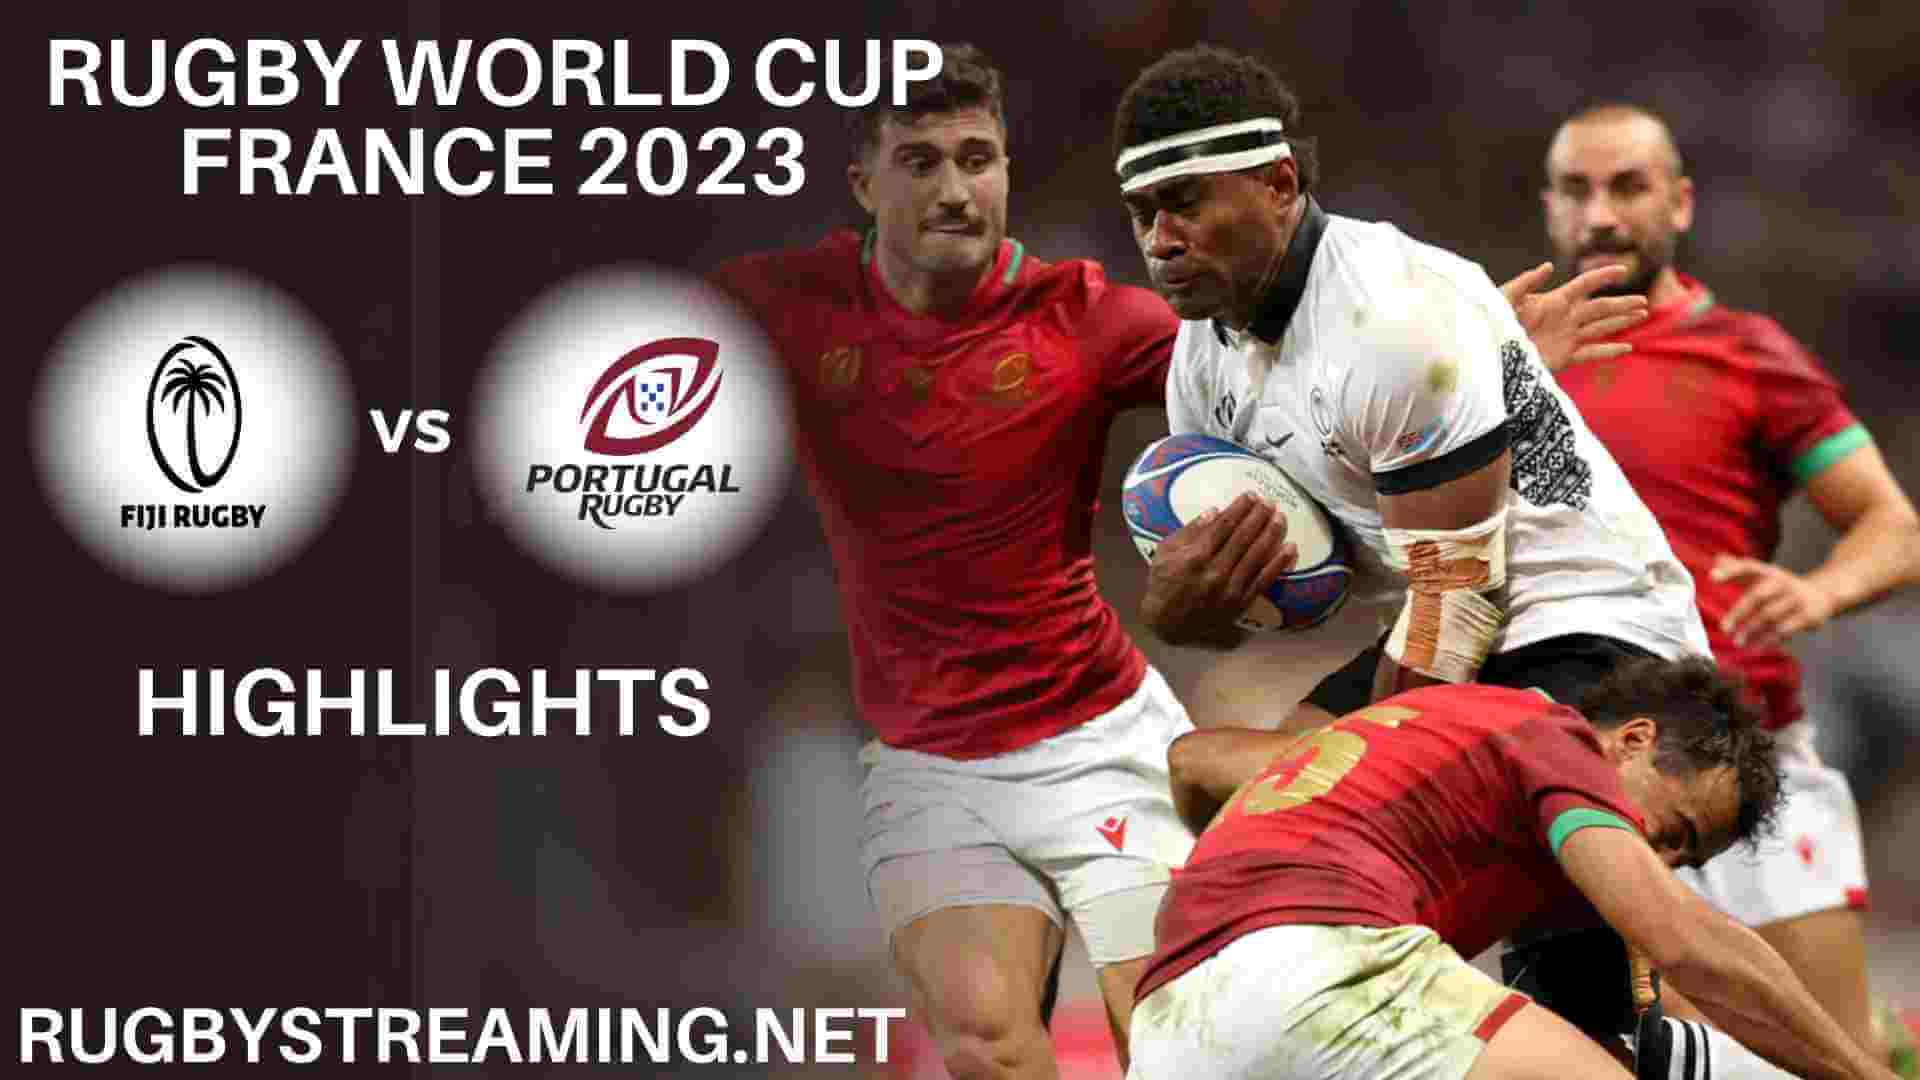 Fiji Vs Portugal Highlights Rugby World Cup 2023